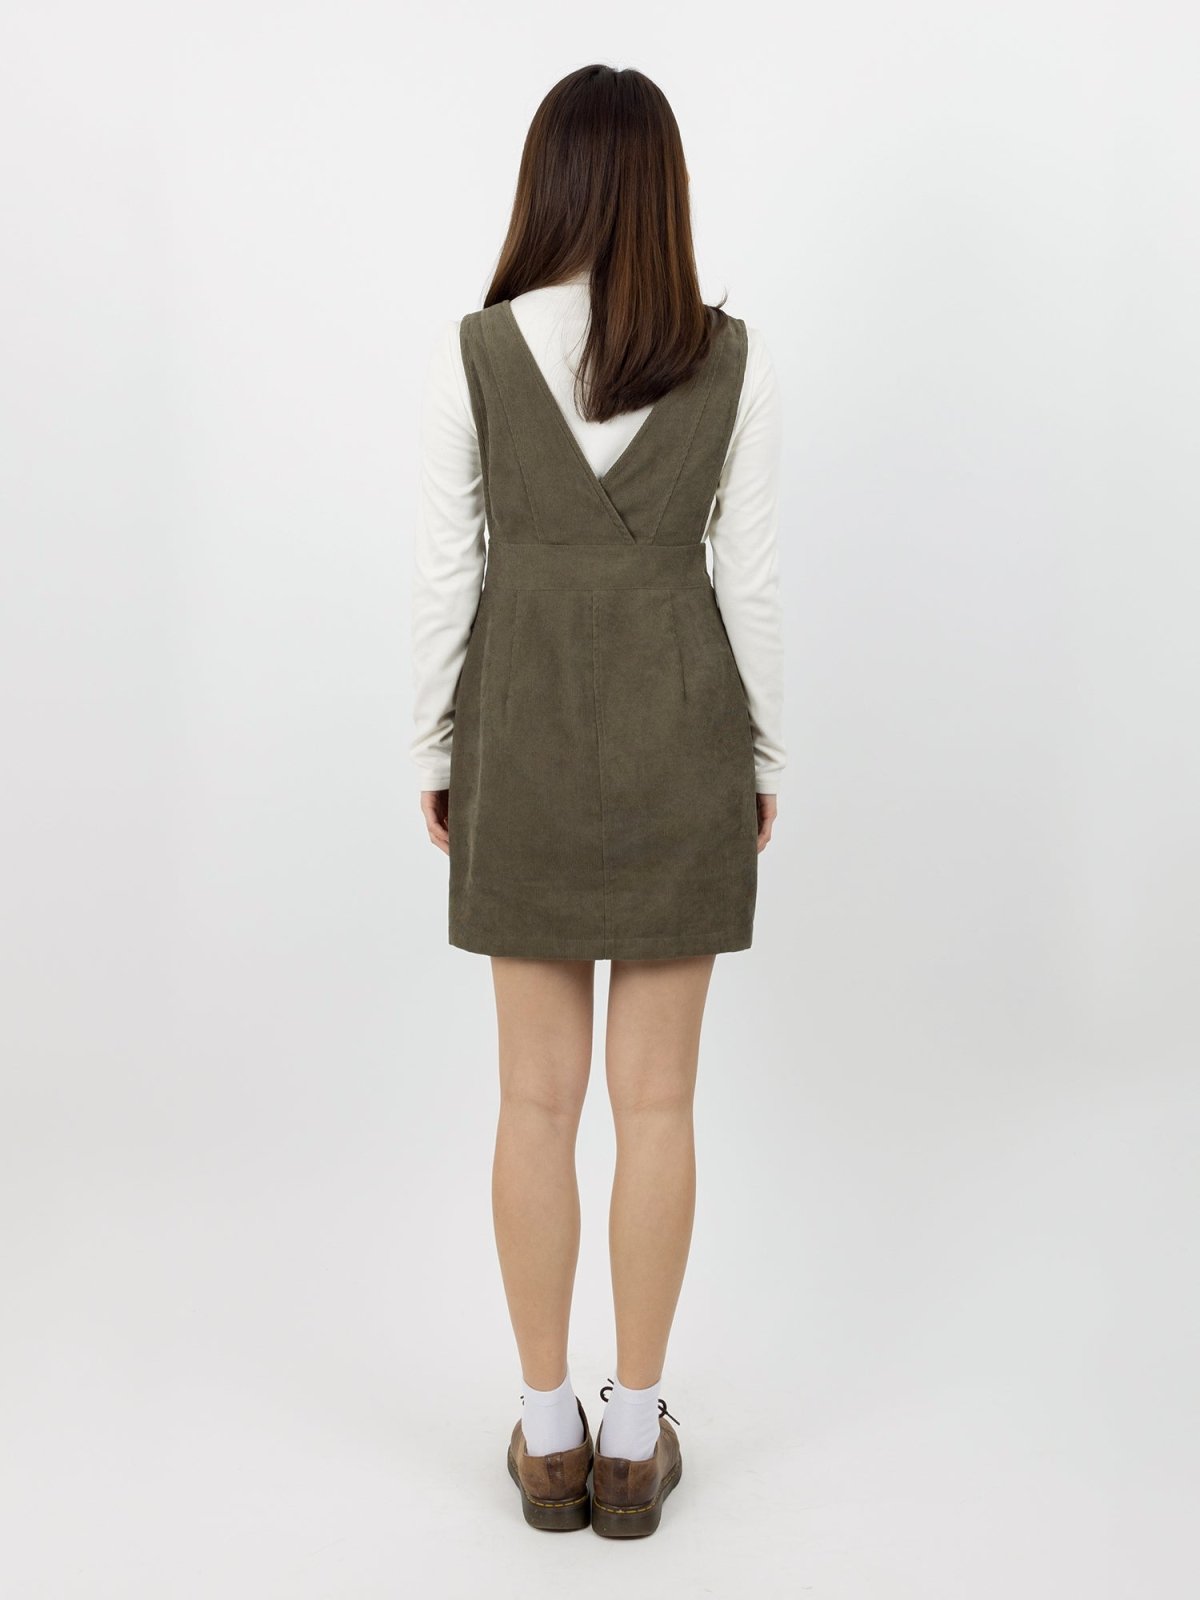 Marie Corduroy Buttoned Mini Dress - DAG-DD0072-22MatchaS - Olive Green - S - D'zage Designs